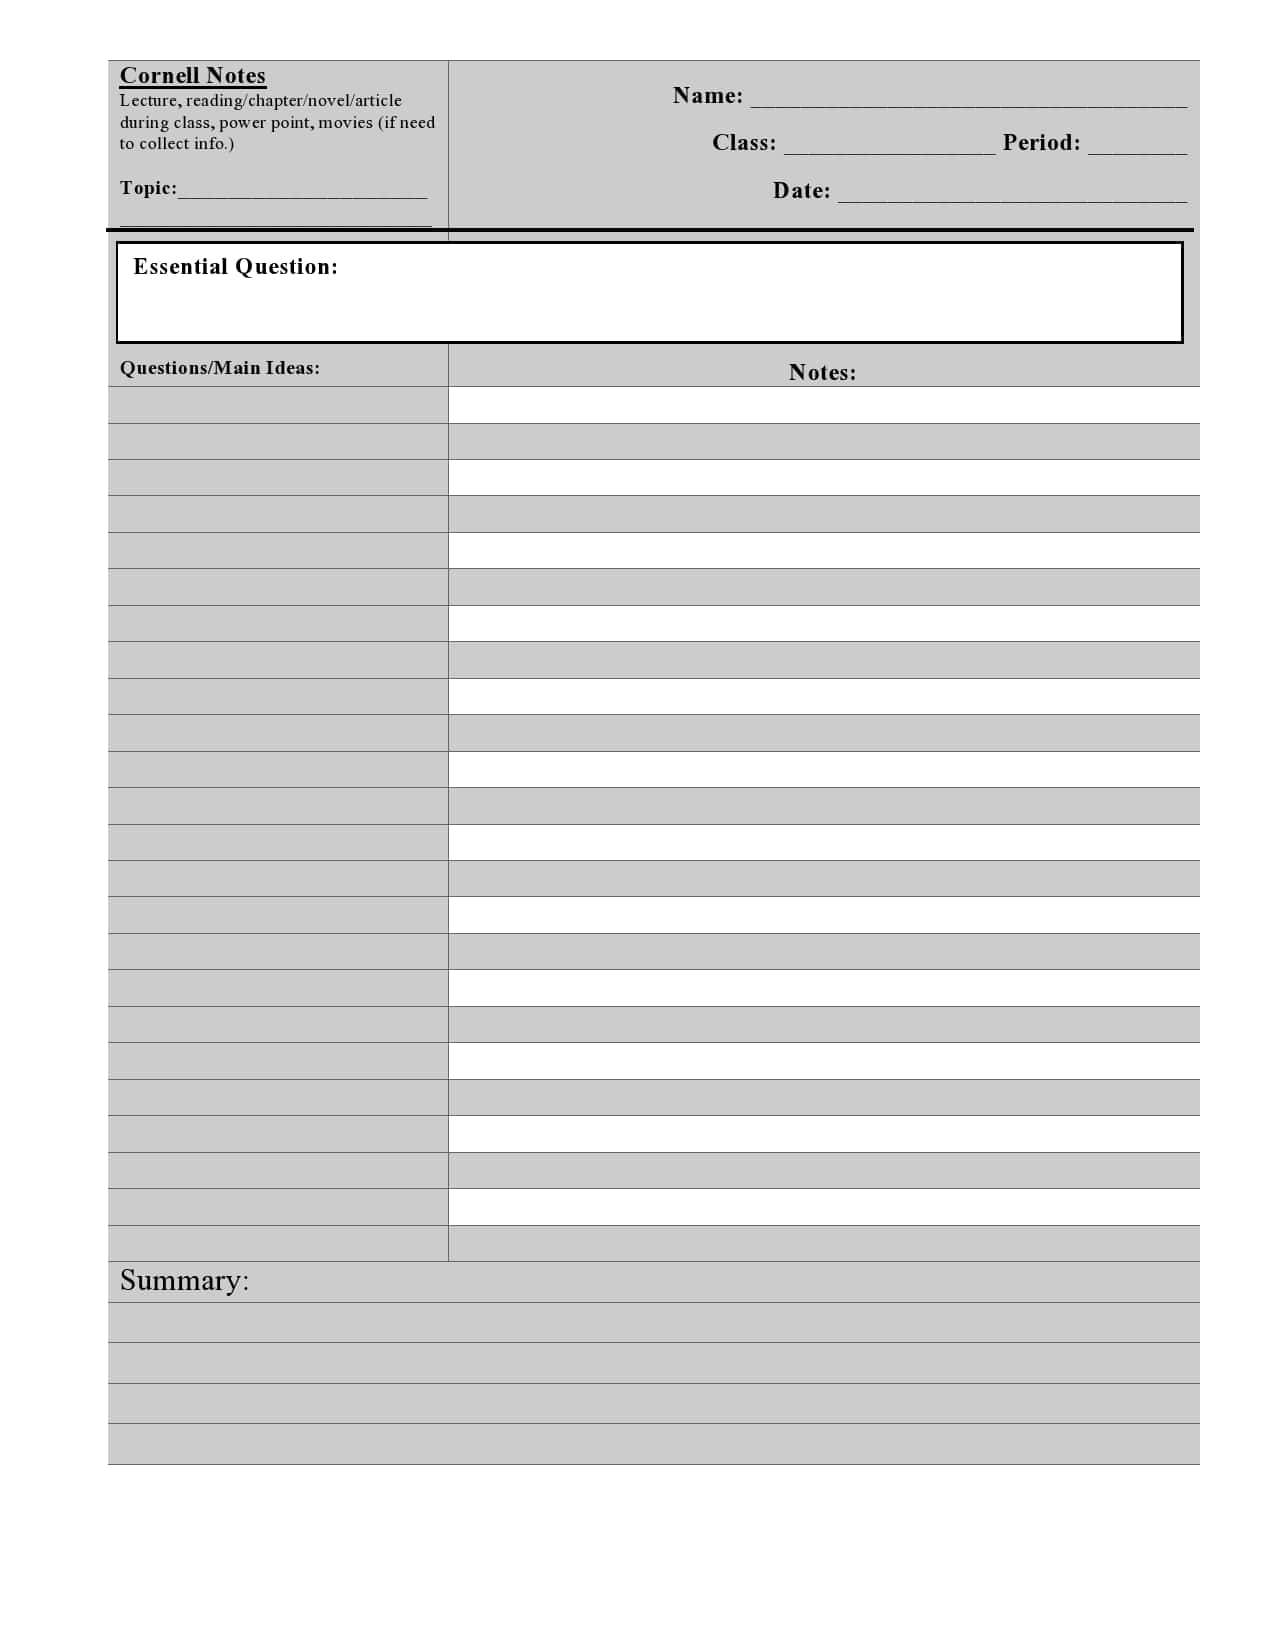 21 Printable Cornell Notes Templates [Free] - TemplateArchive Throughout Microsoft Word Note Taking Template